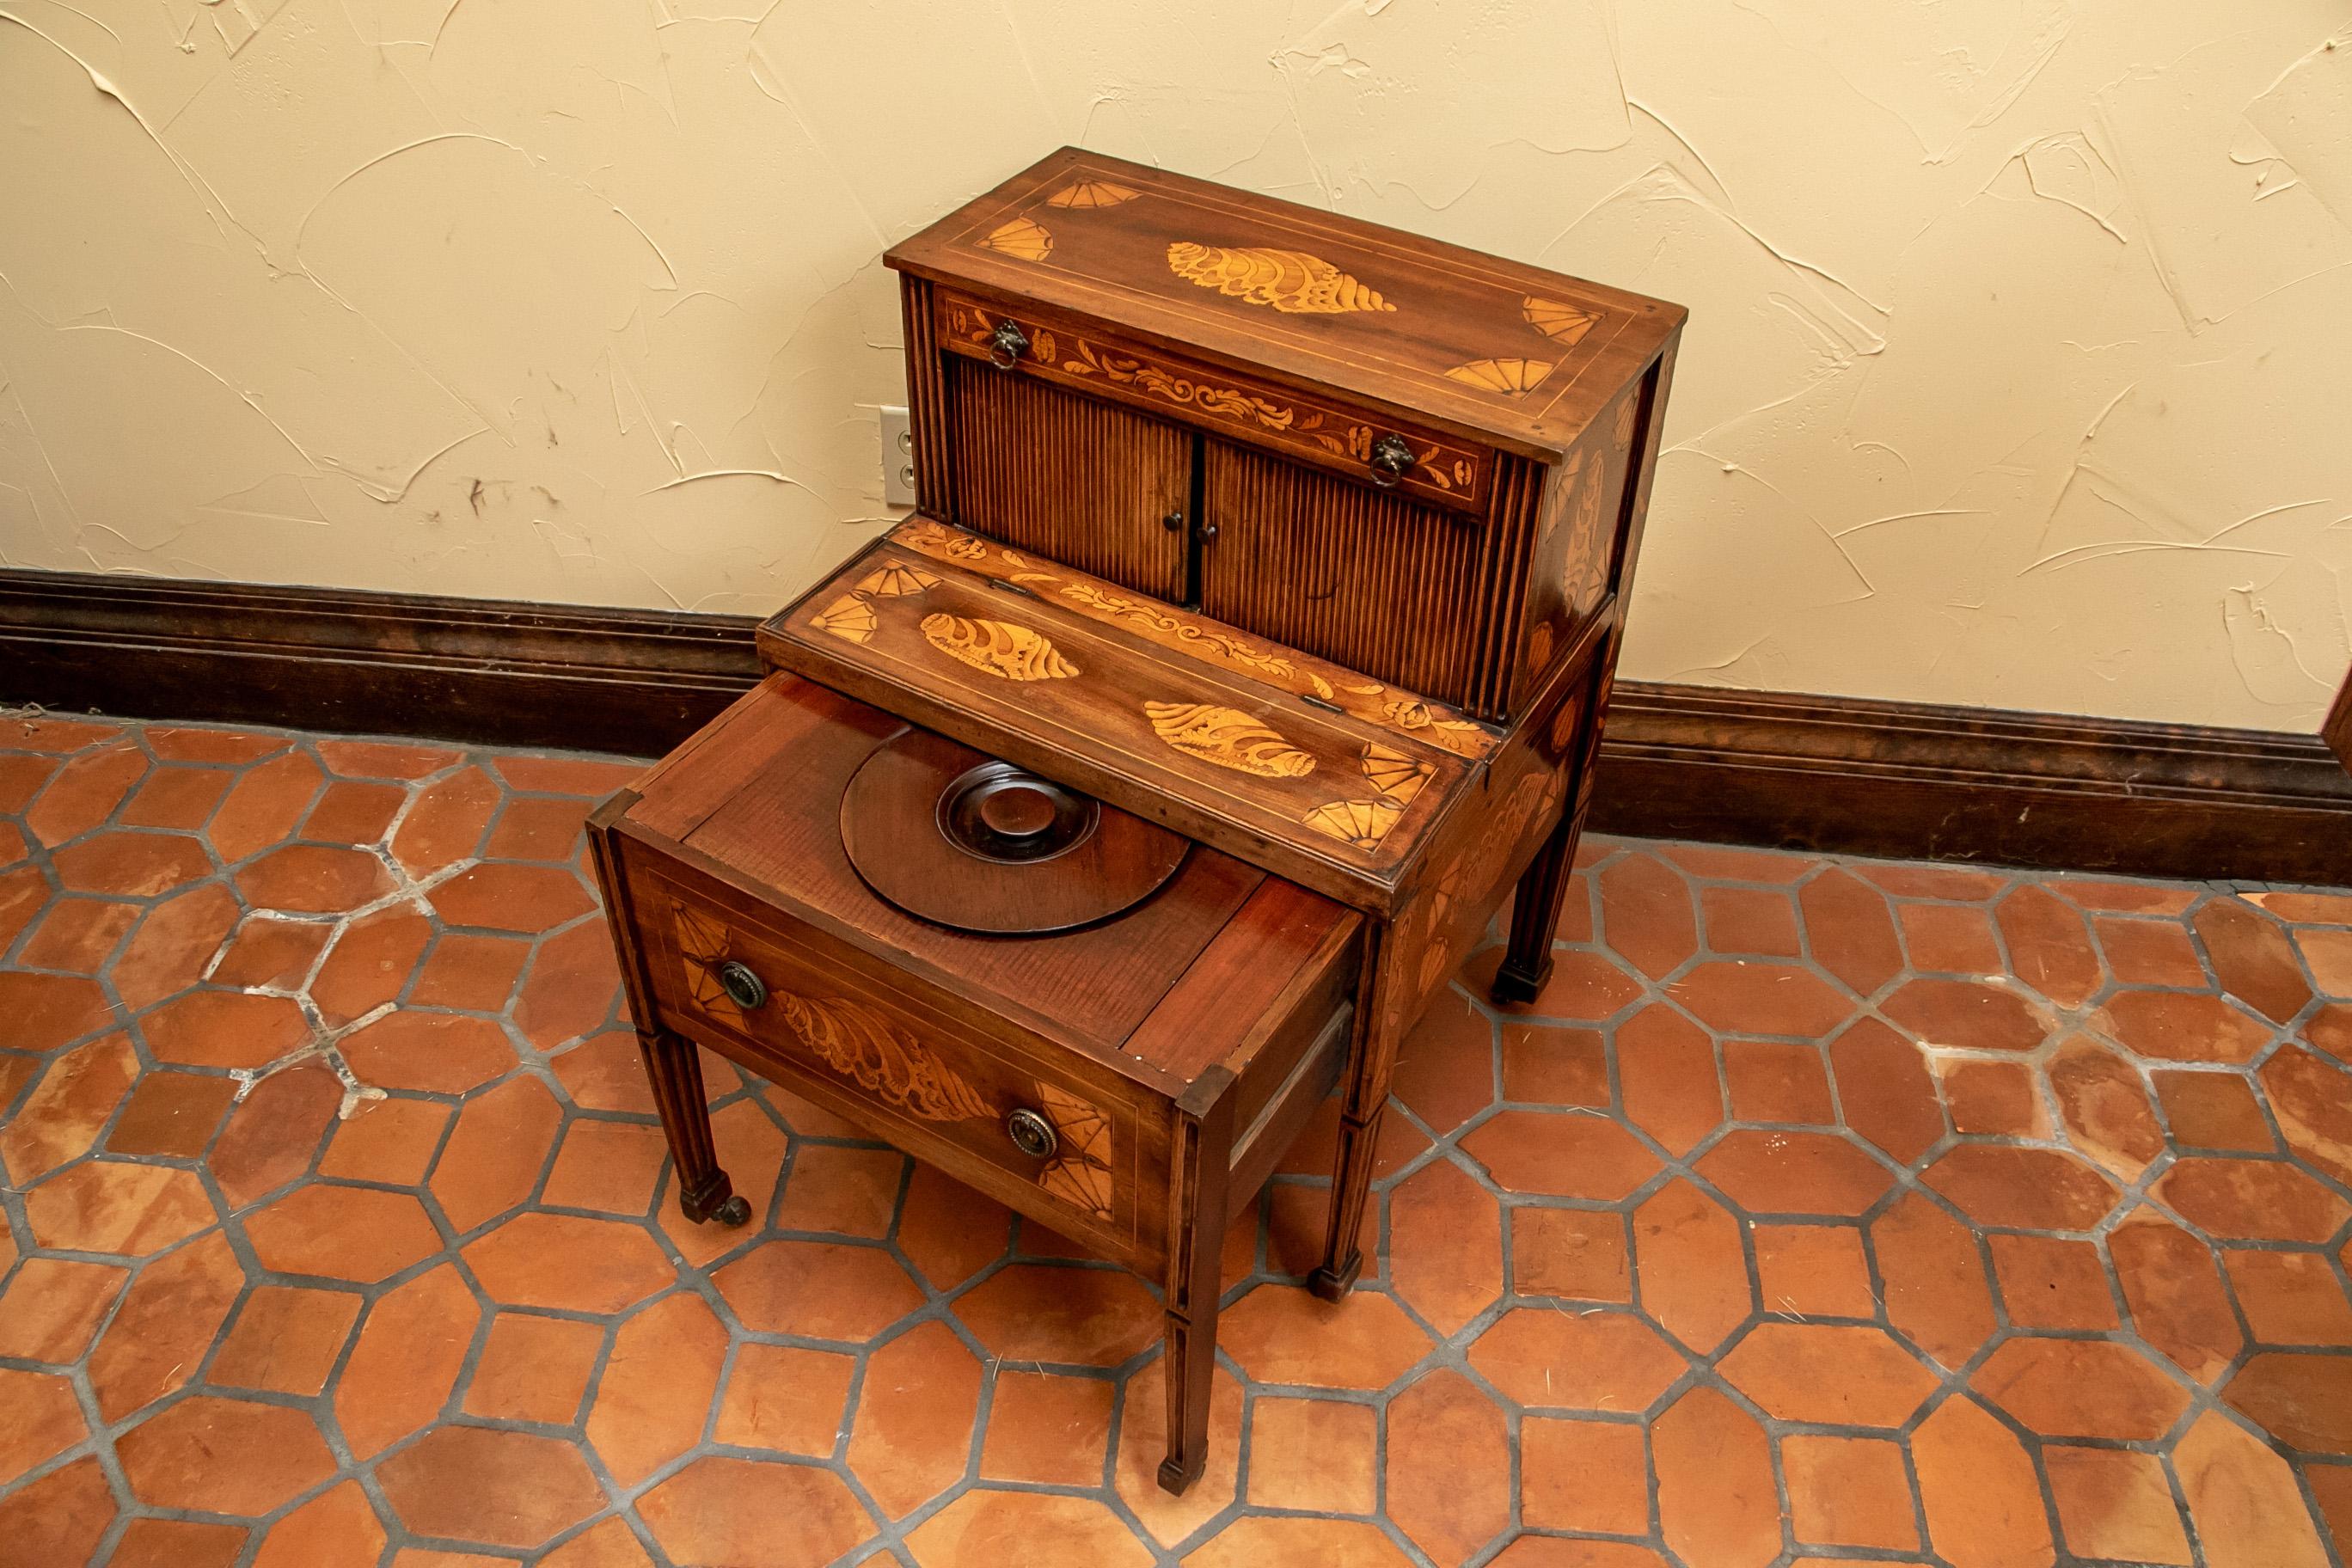 19th Century Walnut Commode with Contrasting Inlaid Veneer In Good Condition For Sale In Bridgeport, CT